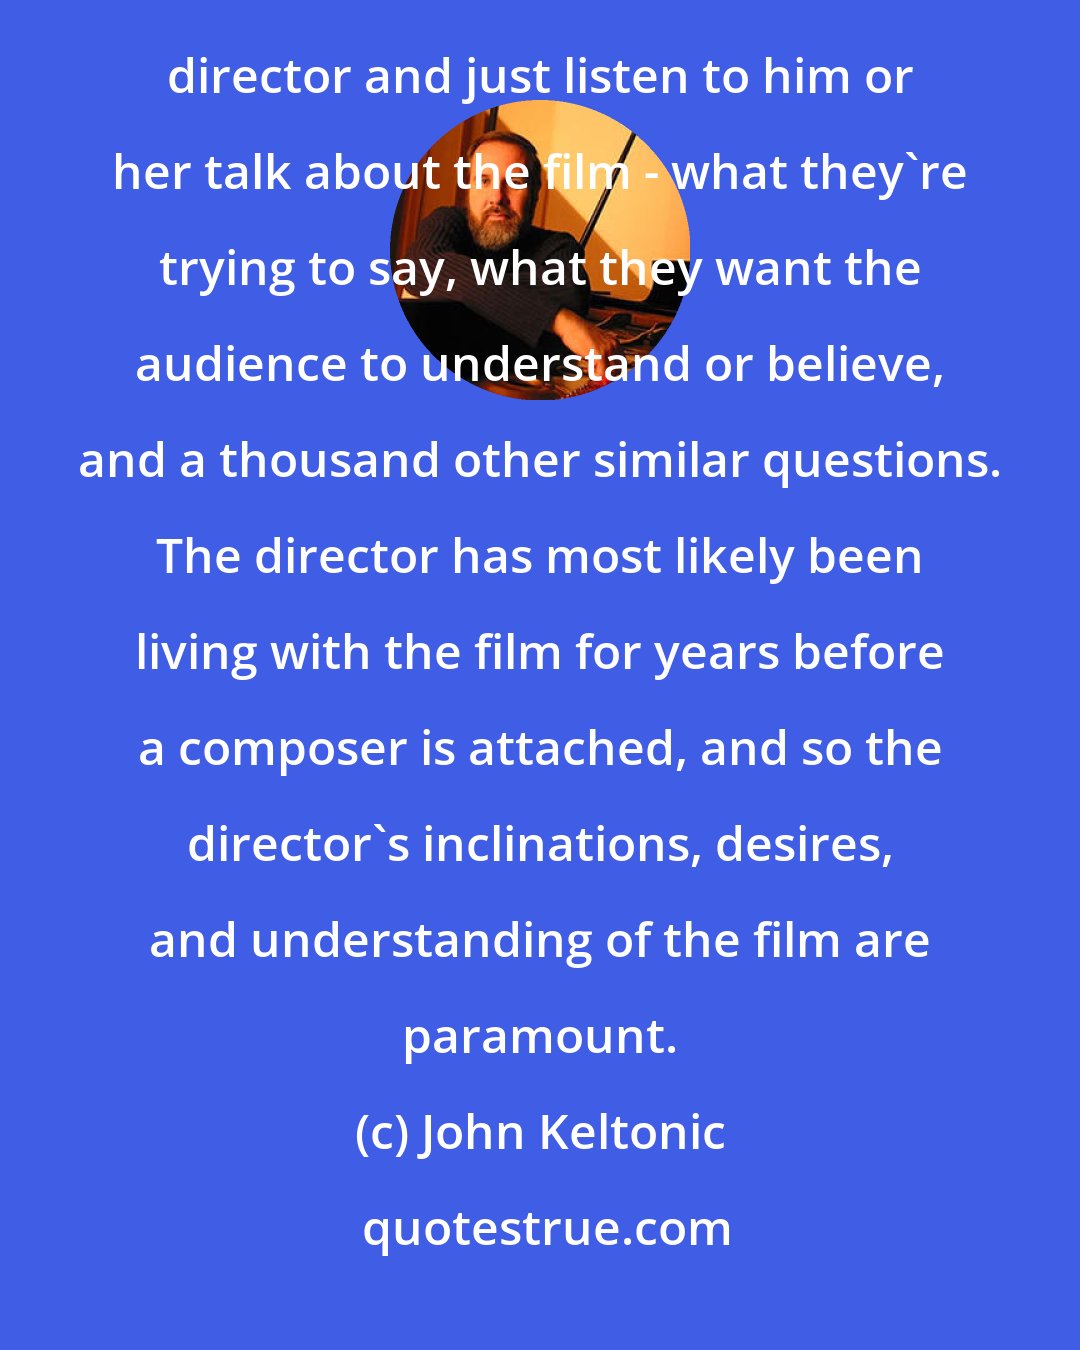 John Keltonic: Before writing a single note of music, and even before the spotting session, I find it best to sit down with the director and just listen to him or her talk about the film - what they're trying to say, what they want the audience to understand or believe, and a thousand other similar questions. The director has most likely been living with the film for years before a composer is attached, and so the director's inclinations, desires, and understanding of the film are paramount.